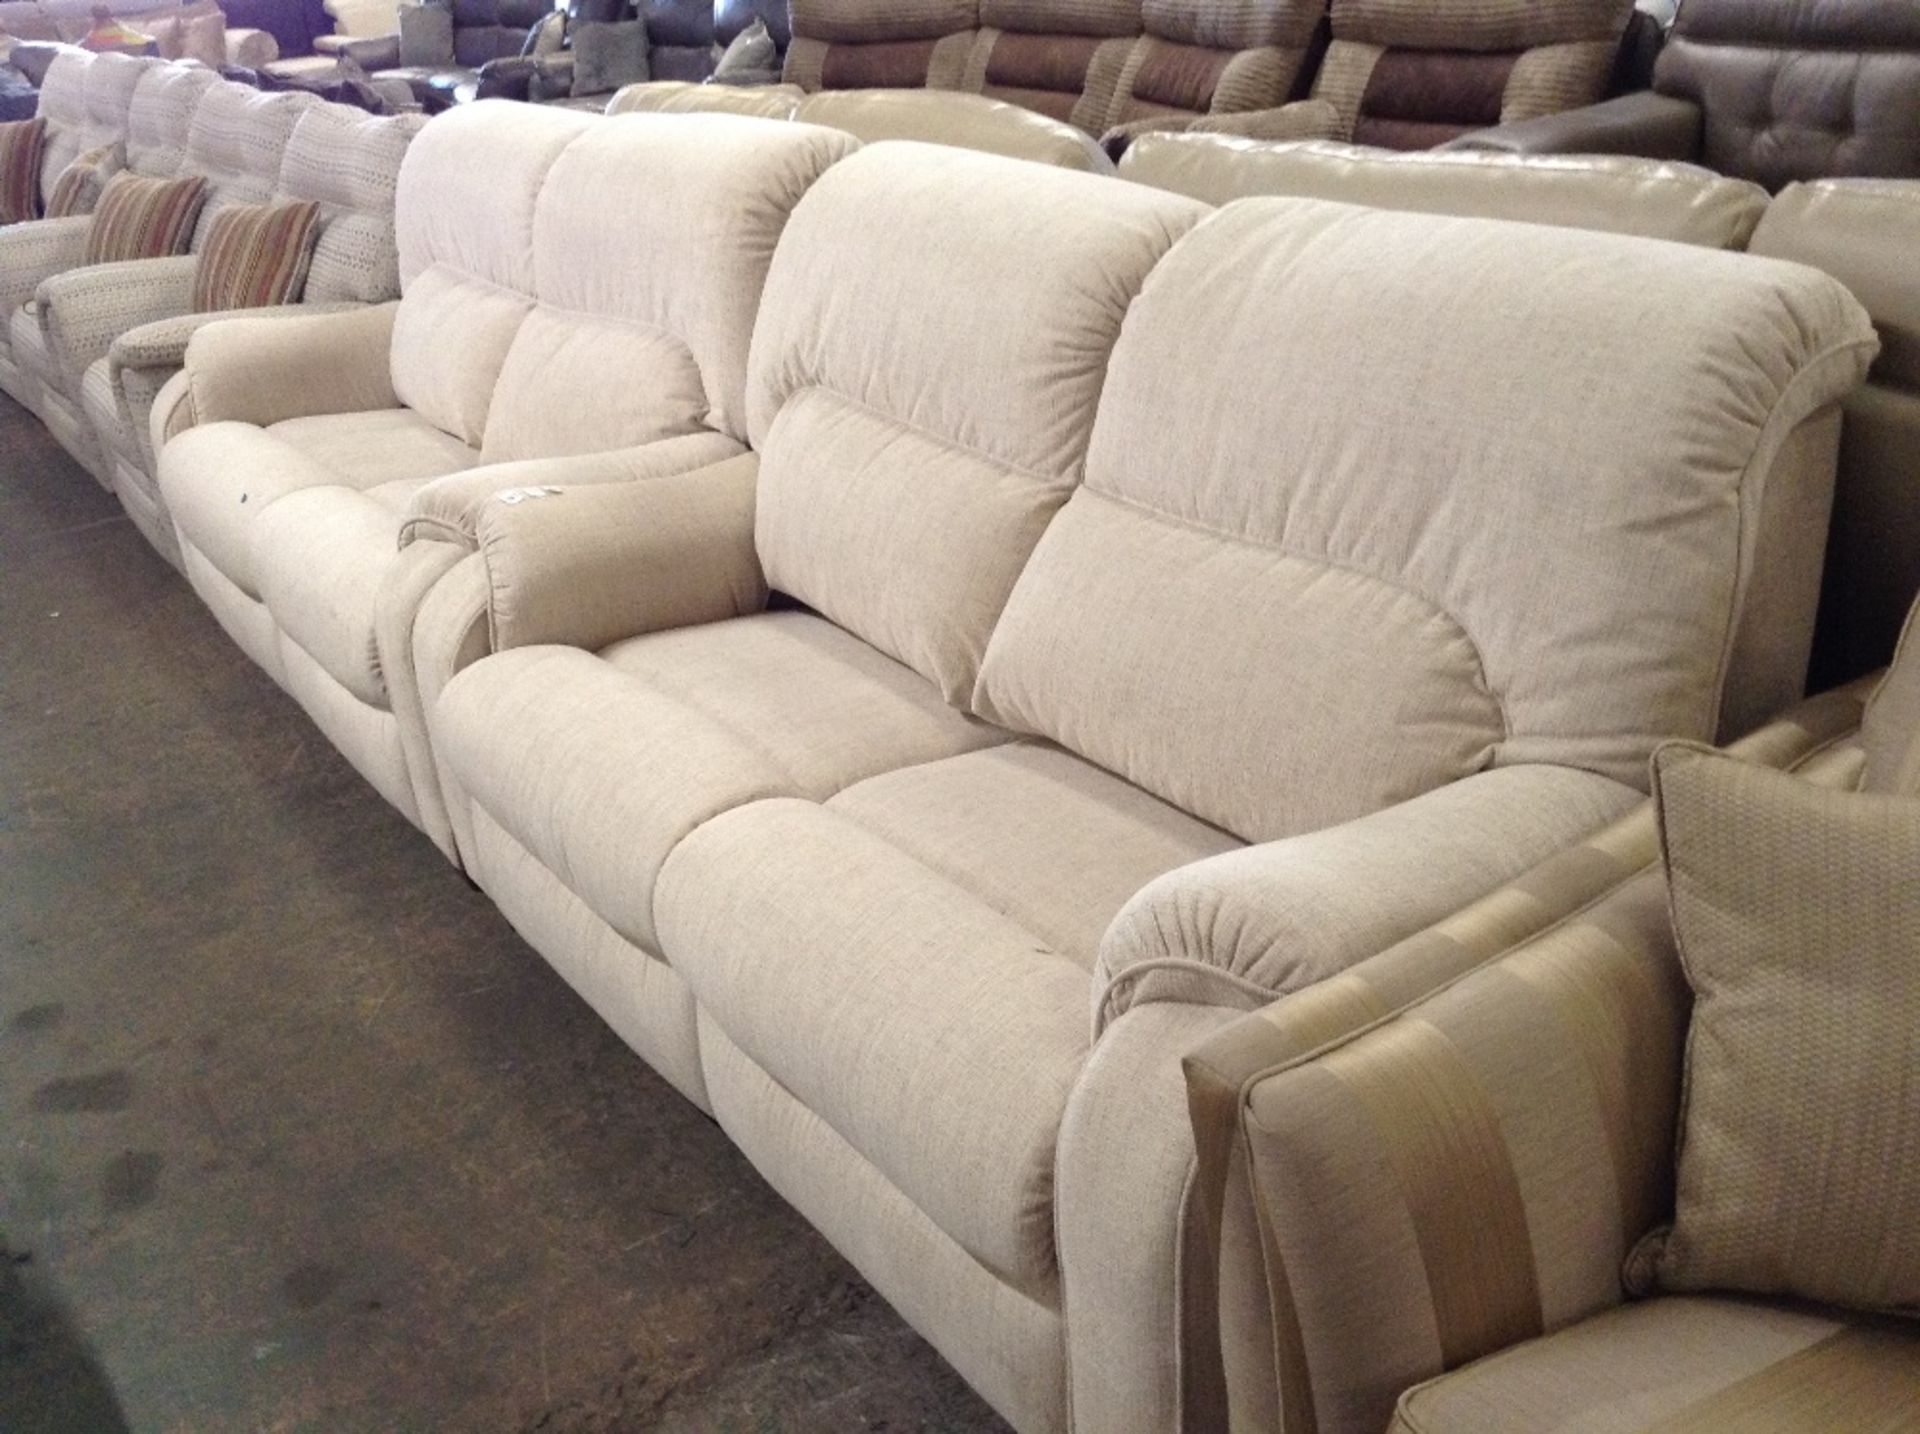 NATURAL HIGH BACK 3 SEATER SOFA AND 2 SEATER SOFA